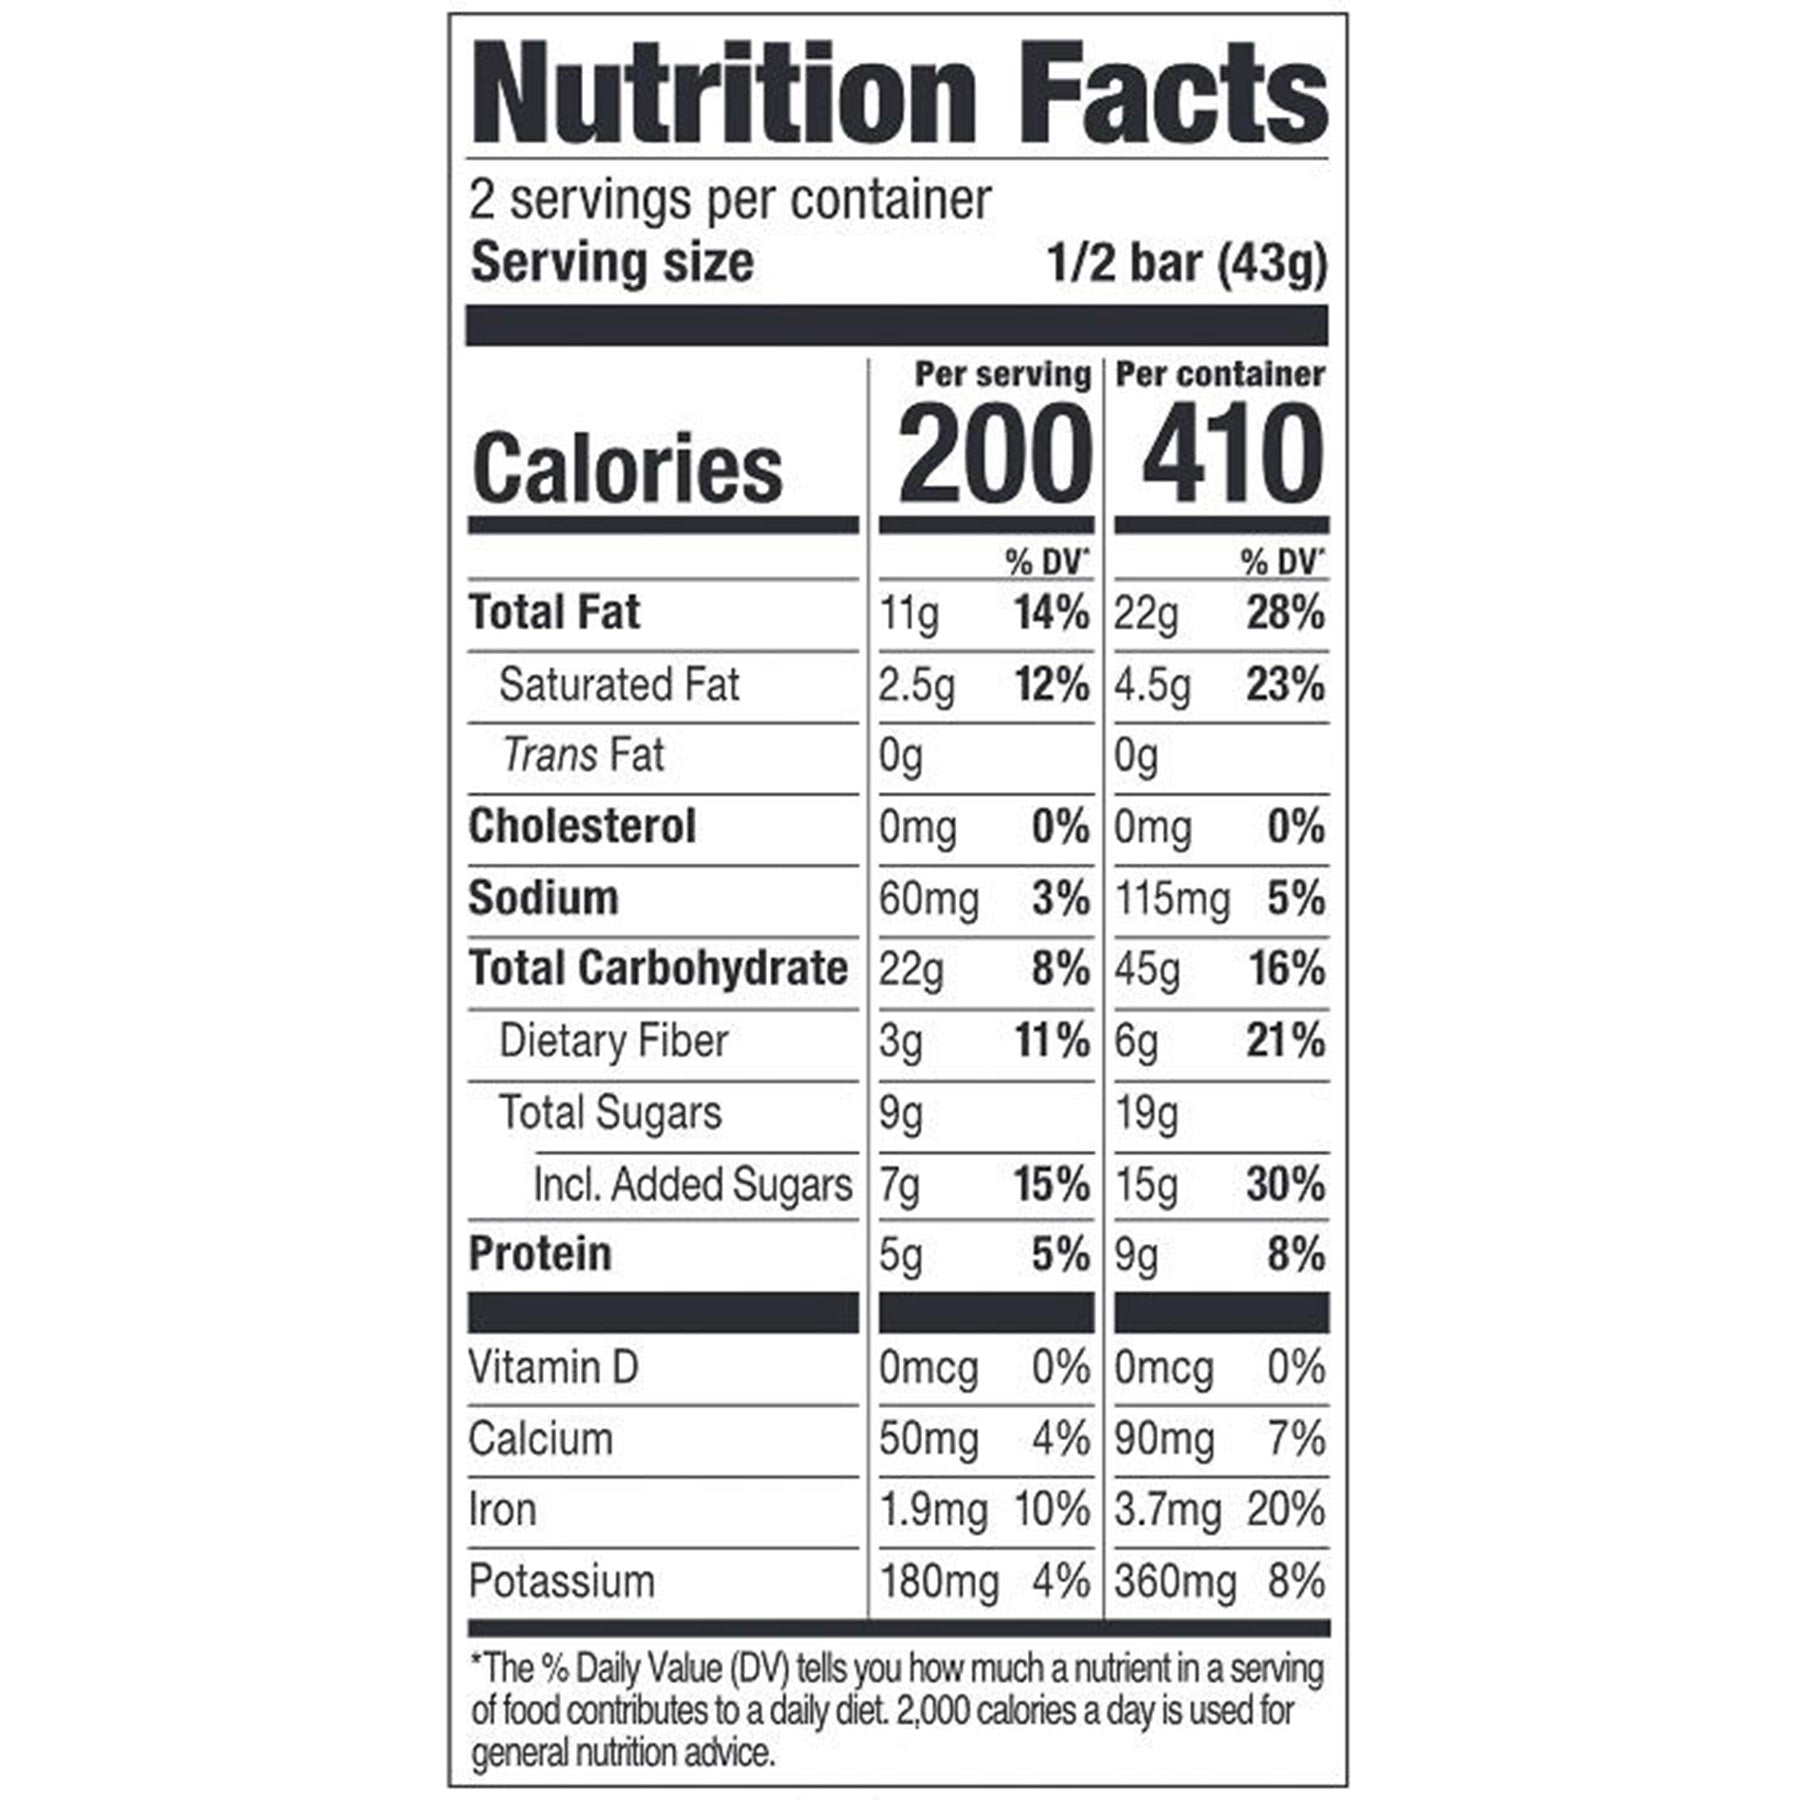 The nutrition facts panel from the oatmeal chocolate chip pro bar